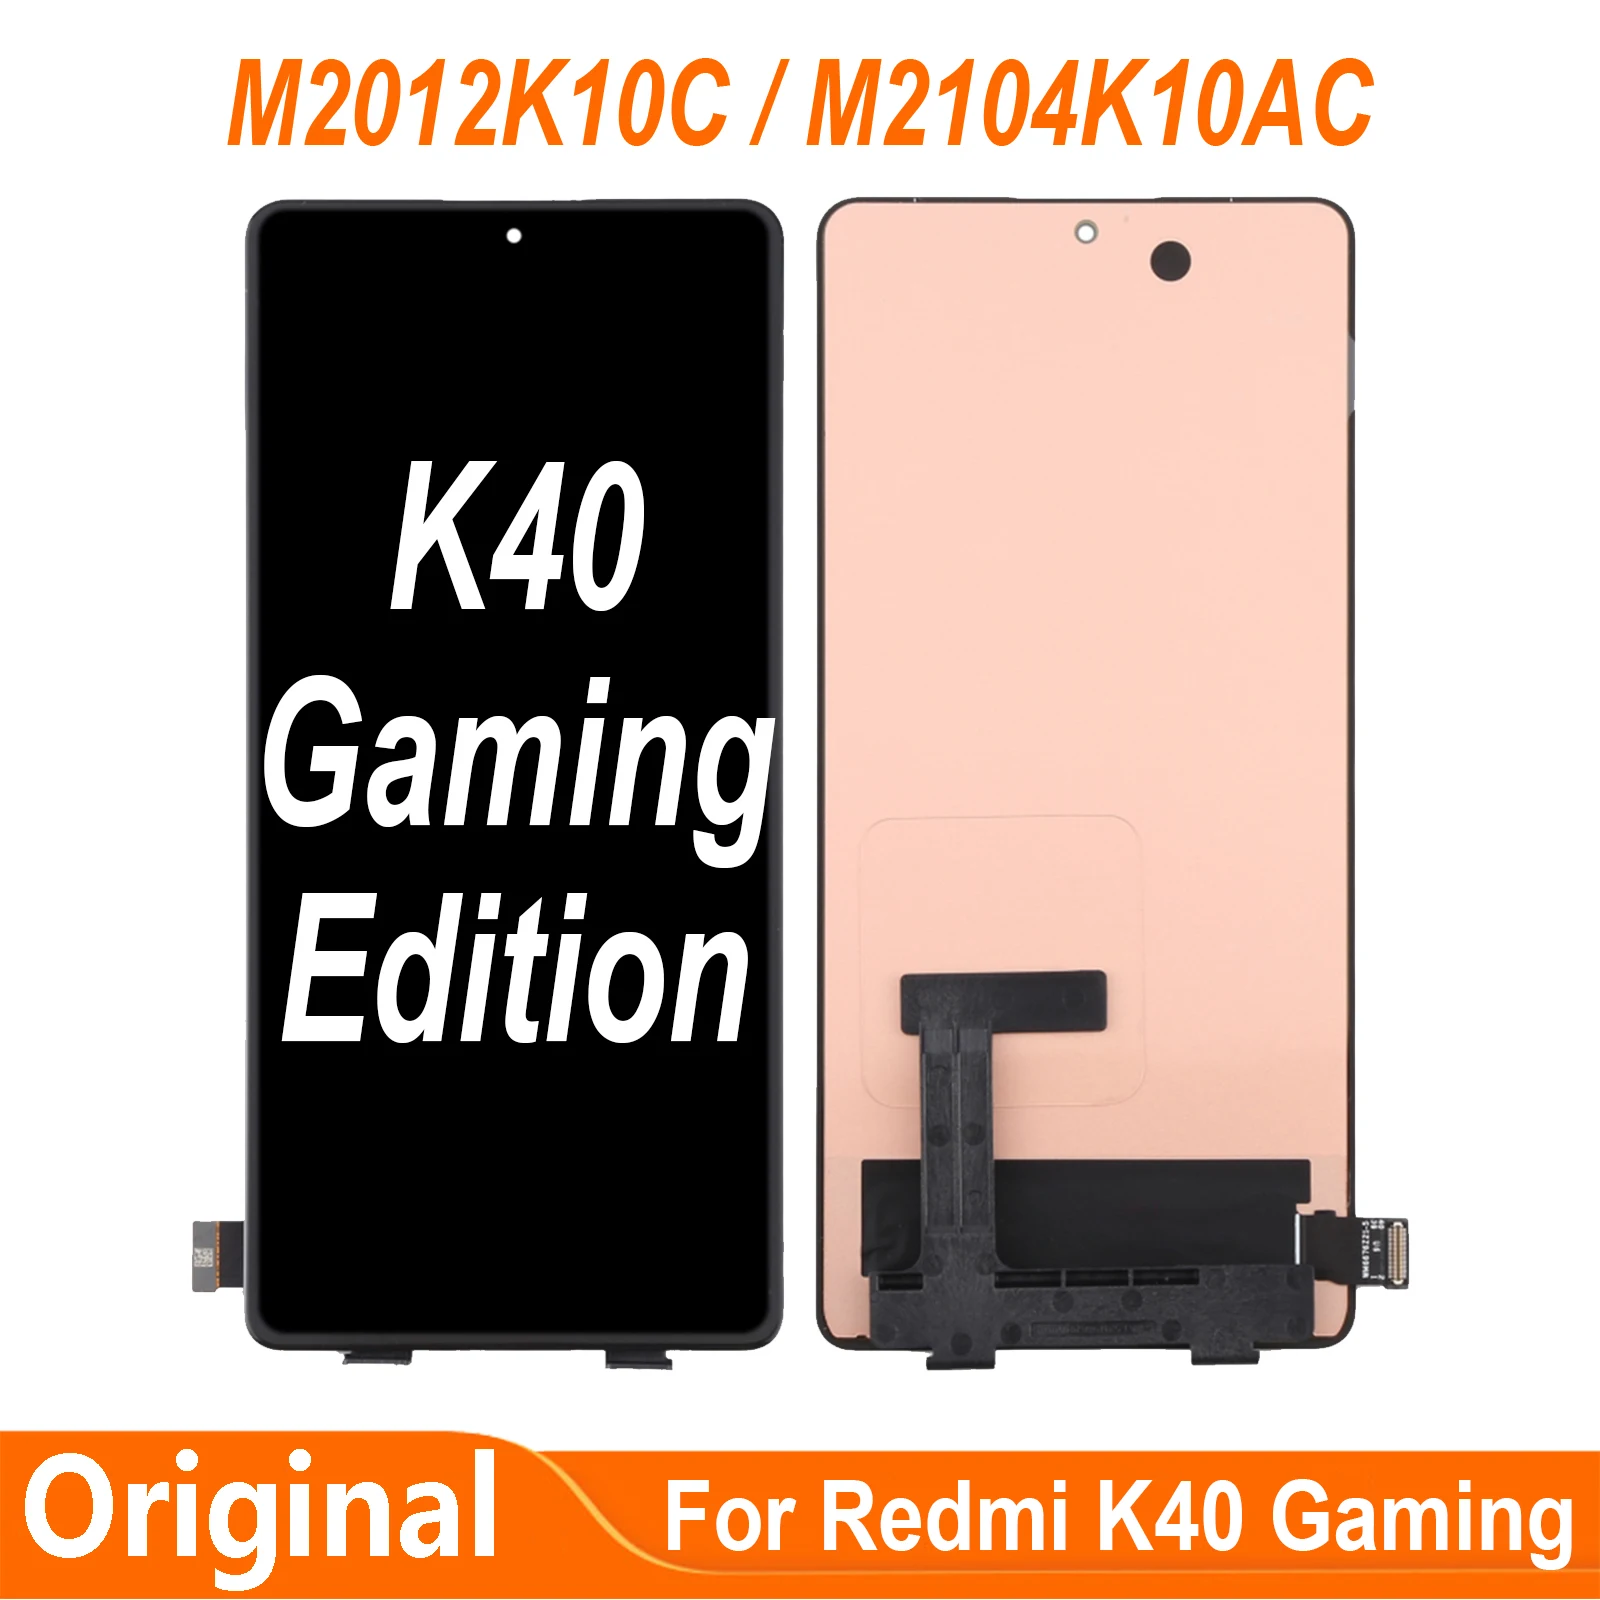 Original For Xiaomi Redmi K40 Gaming Edition M2012K10C M2104K10AC LCD Display Touch Screen Digitizer For RedmiK40 Gaming LCD